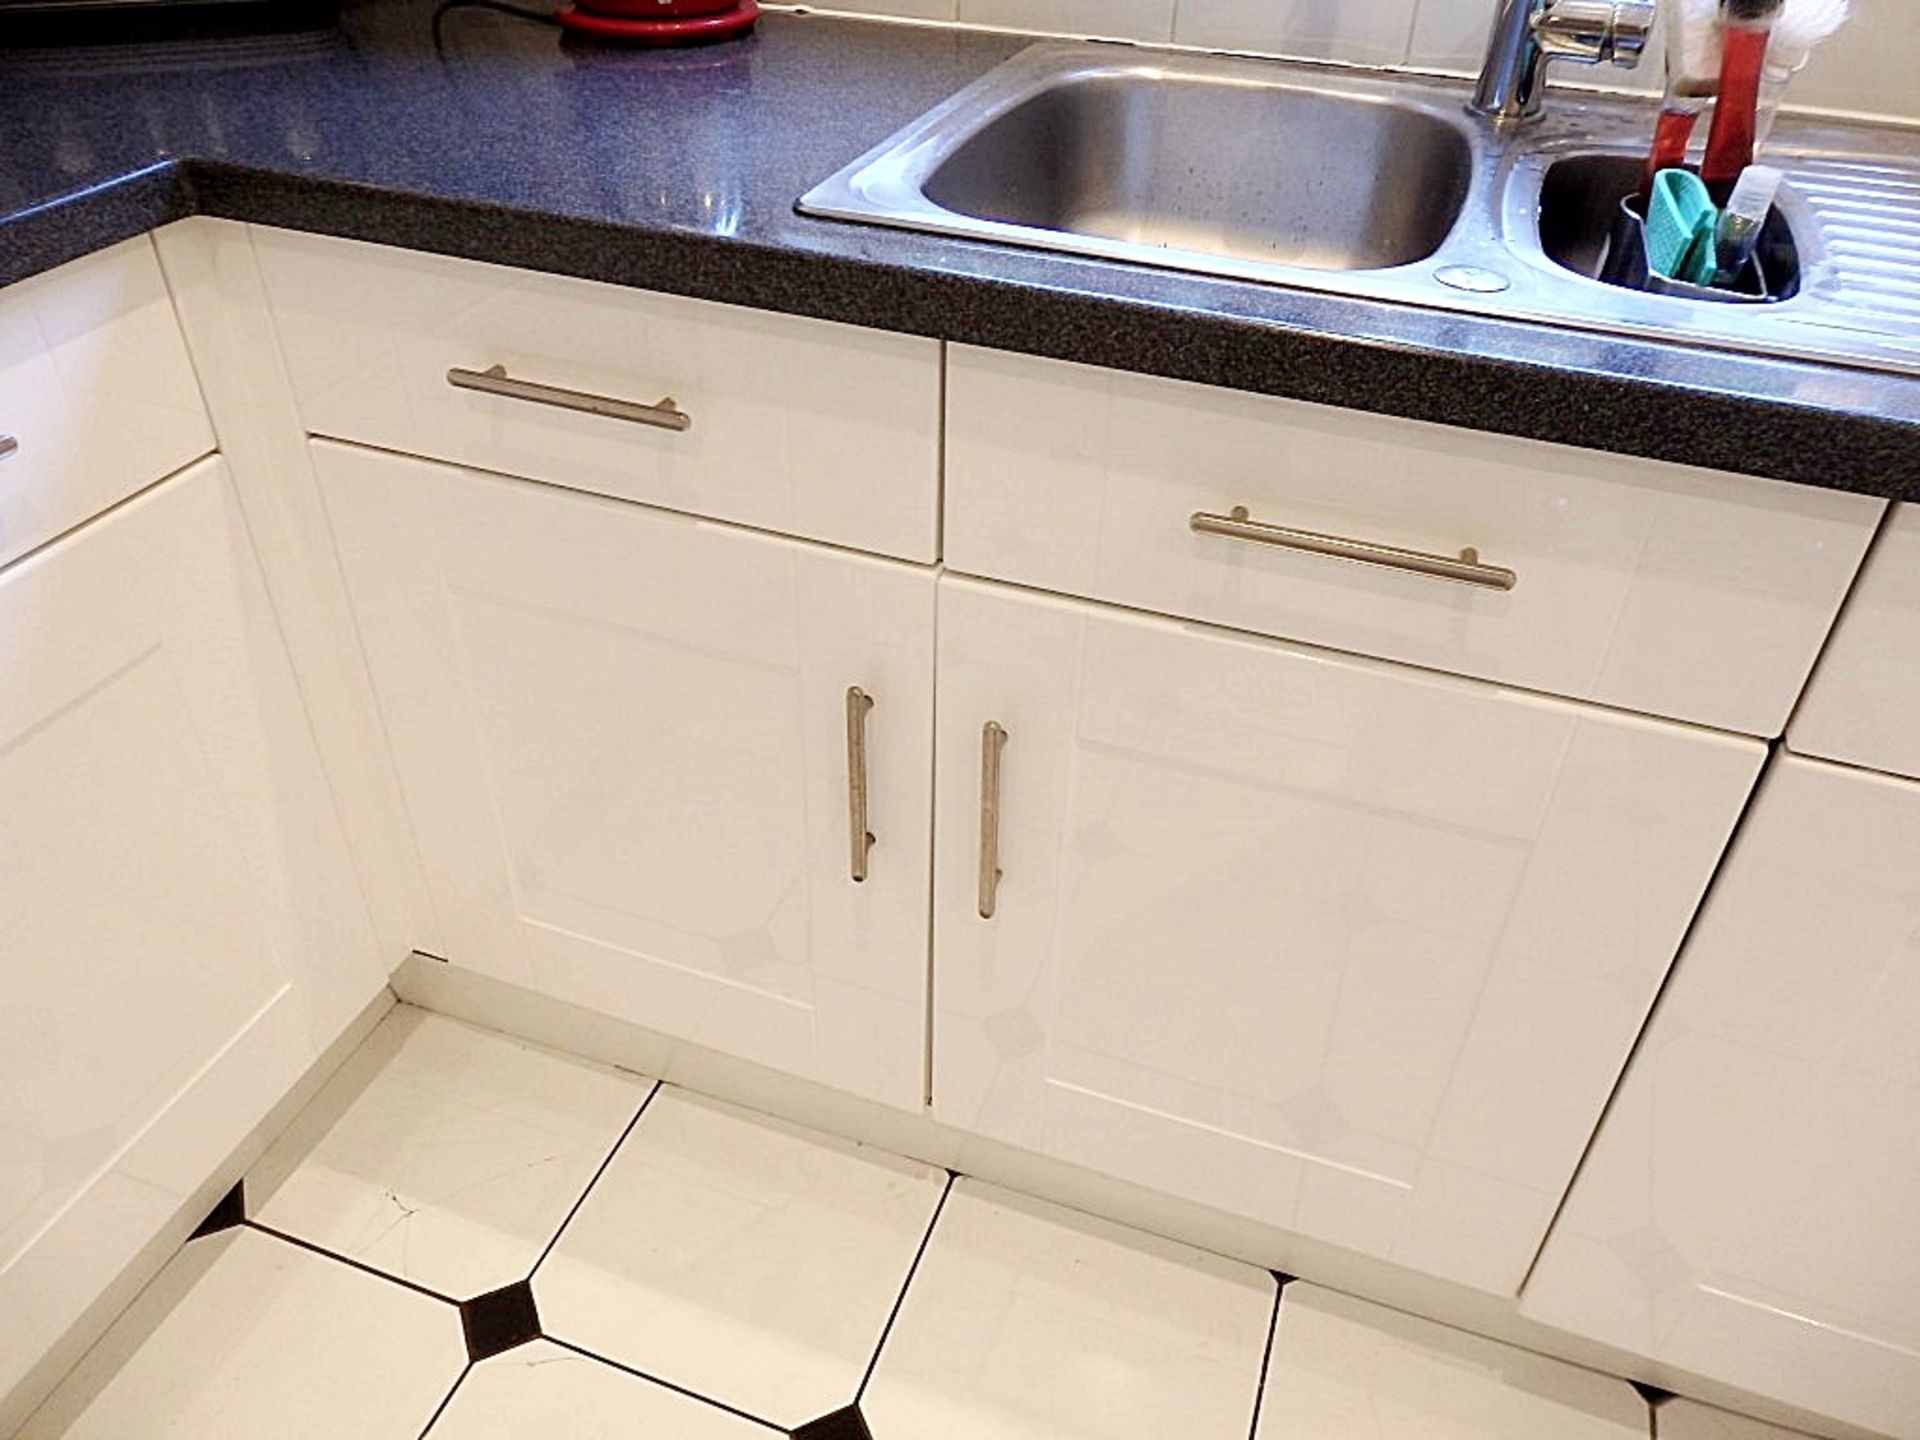 1 x White High Gloss kitchen With Neff Integrated Dishwasher, 5 Ring Stainless Steel Hob, and - Image 12 of 20